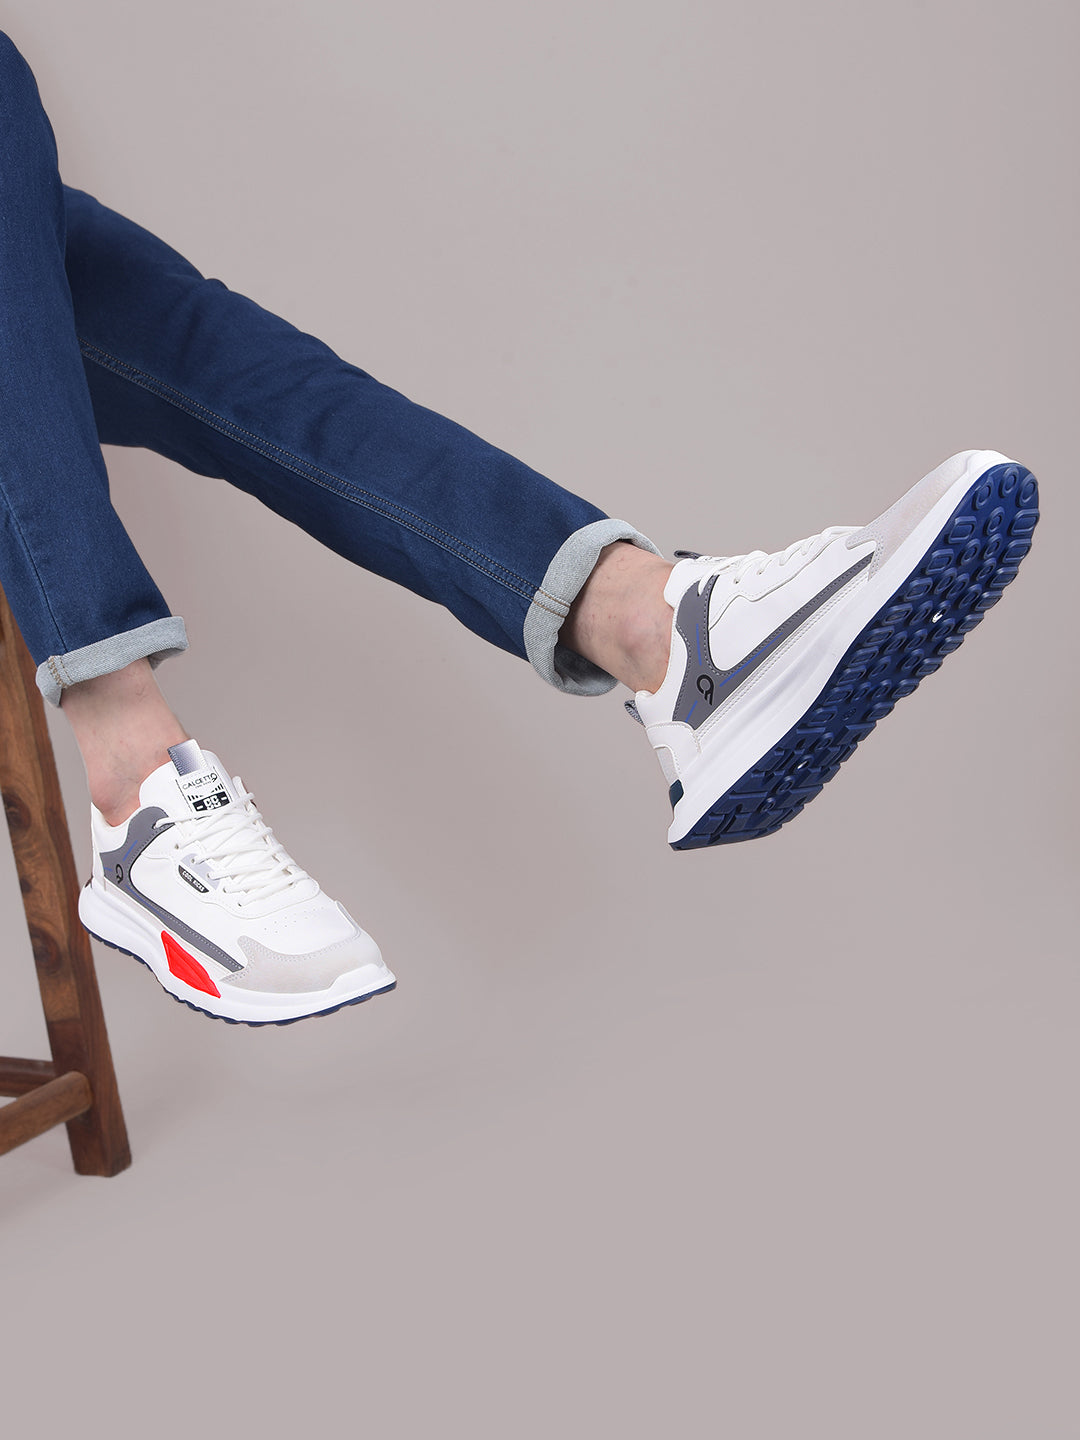 Sirocco White - Men's Sneakers | HEYDUDE Shoes